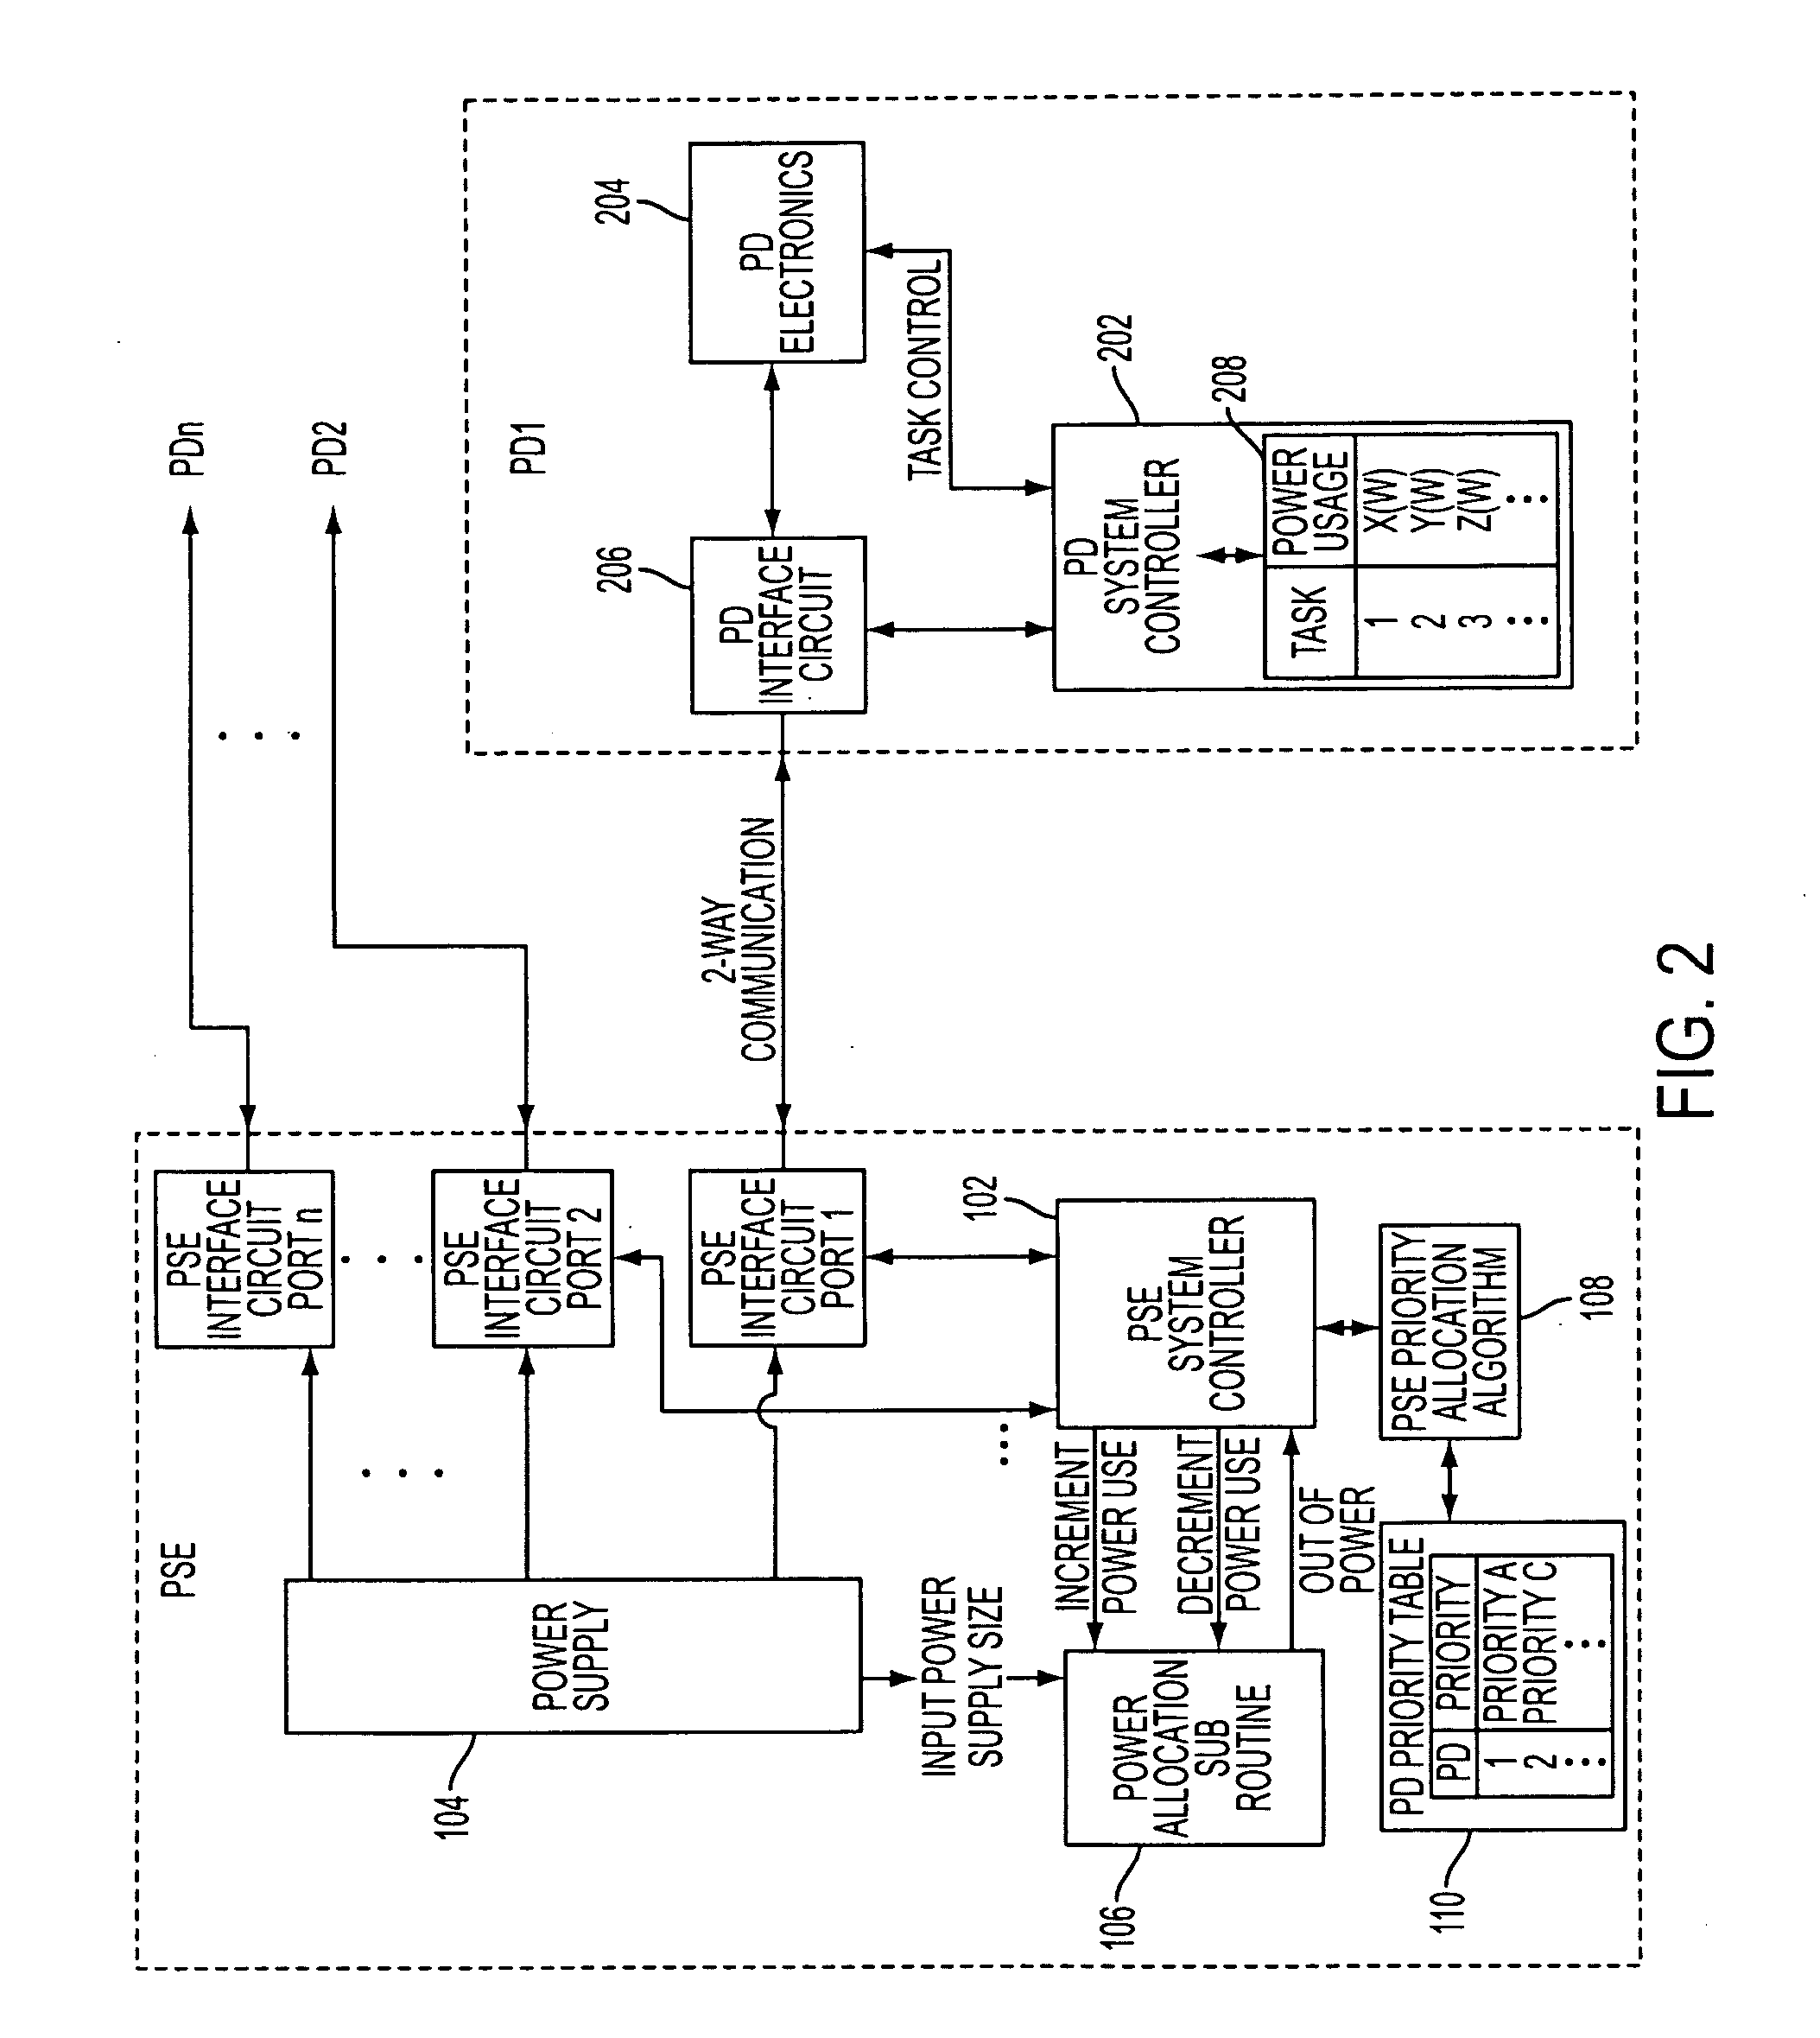 Dynamic power allocation in system for providing power over communication link